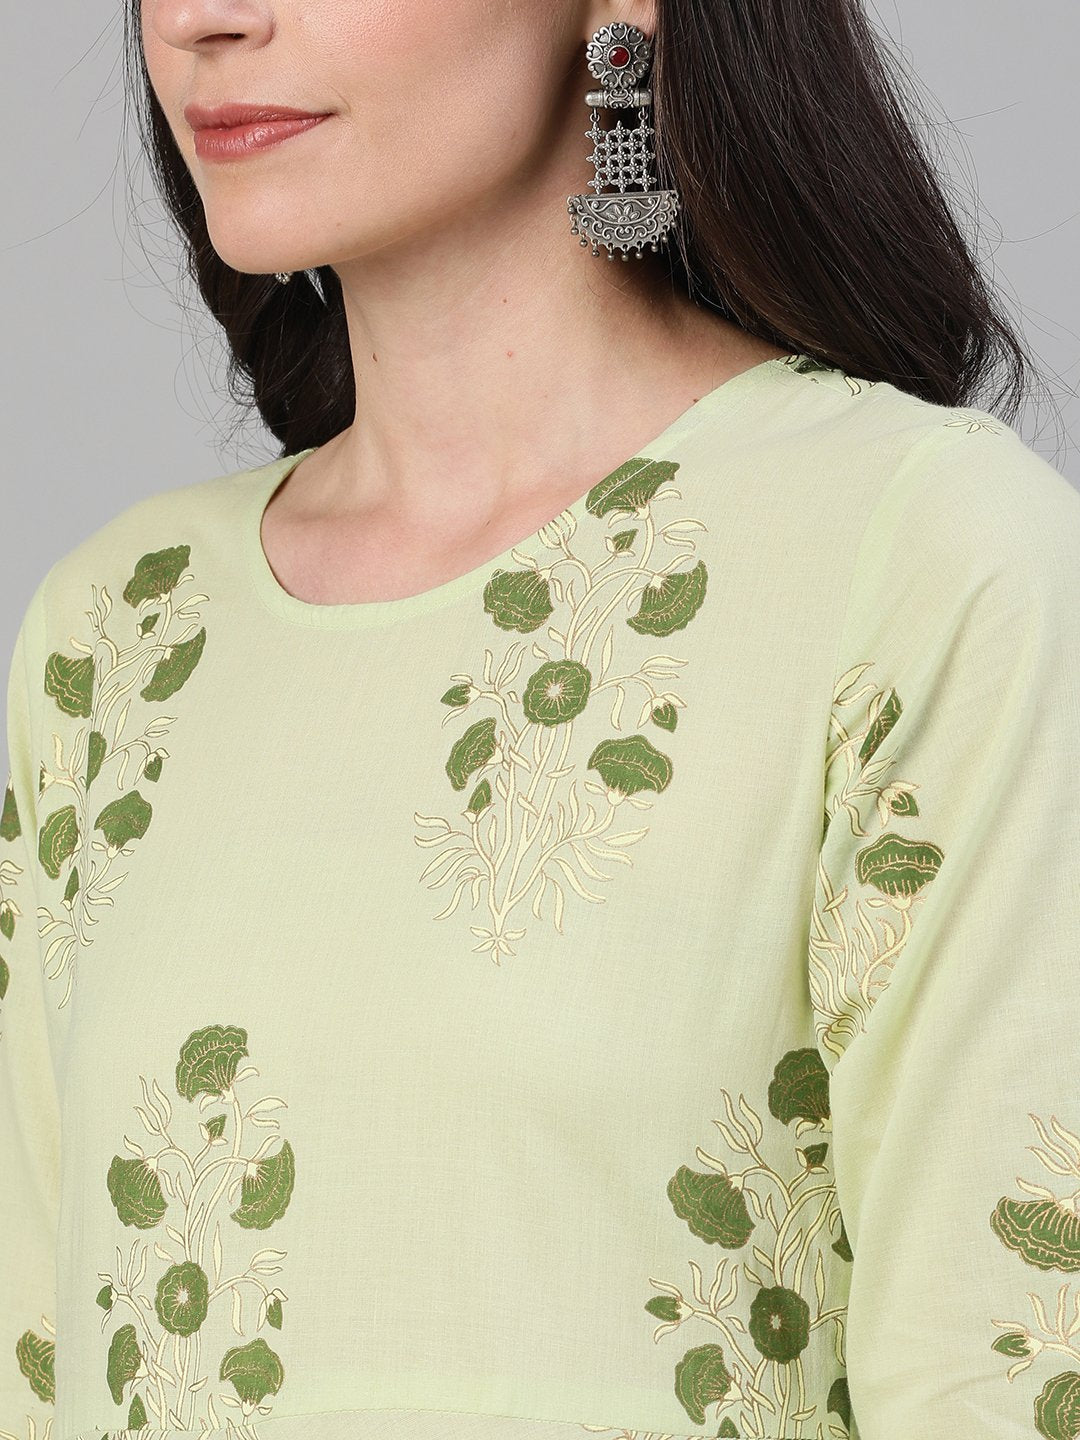 Women's Green Three-Quarter Sleeves Straight Kurta With Palazzo And Dupatta With Pockets And Face Mask - Nayo Clothing